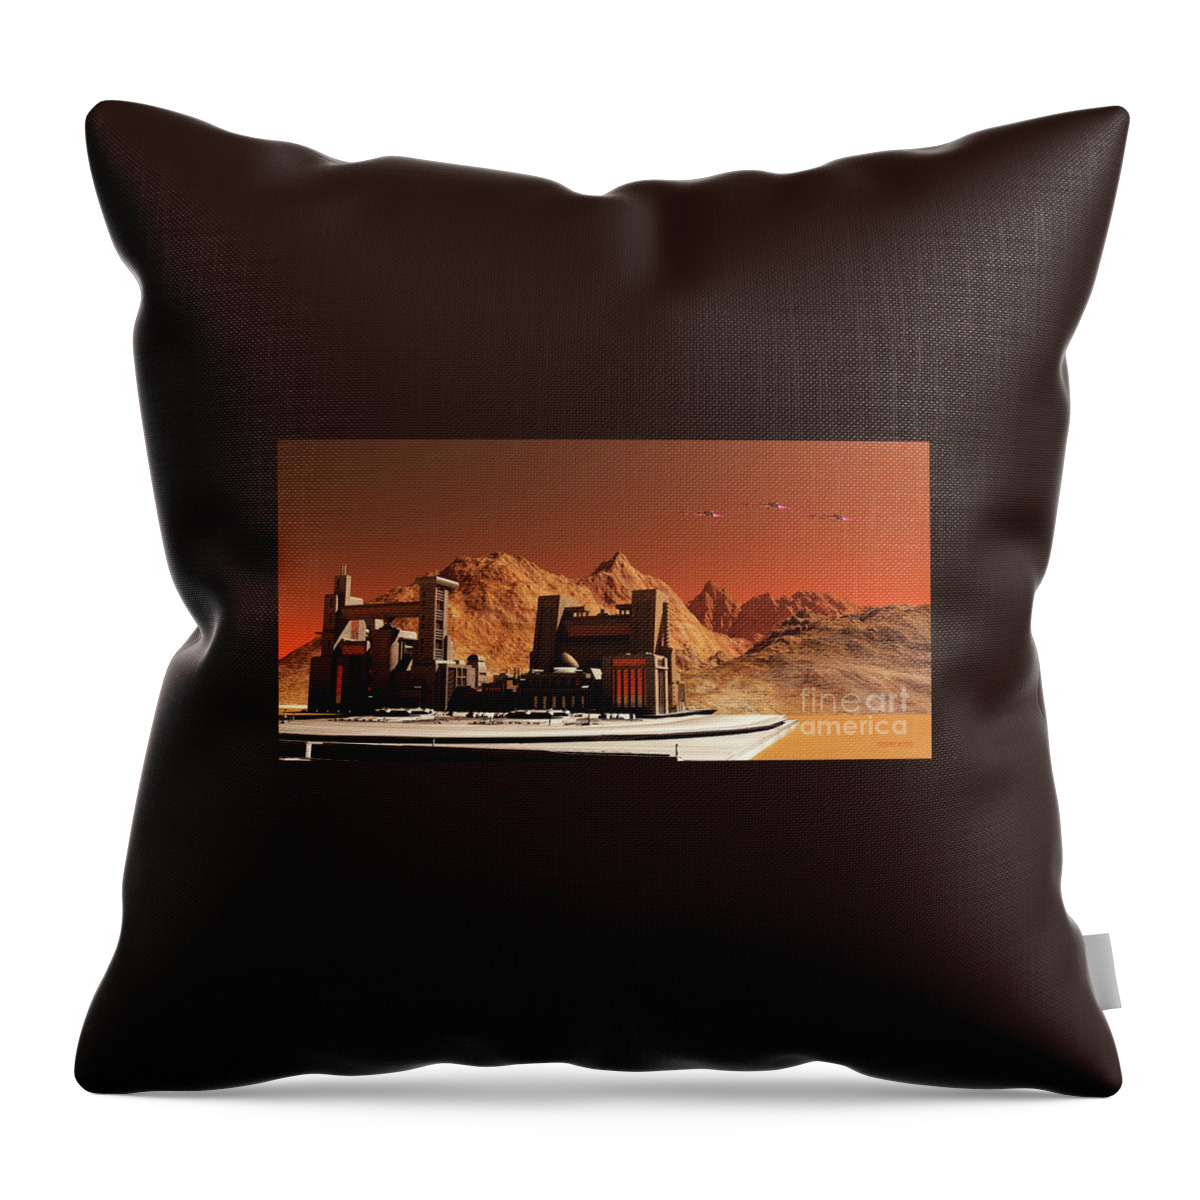 Mars Throw Pillow featuring the digital art Mars Landscape by Corey Ford